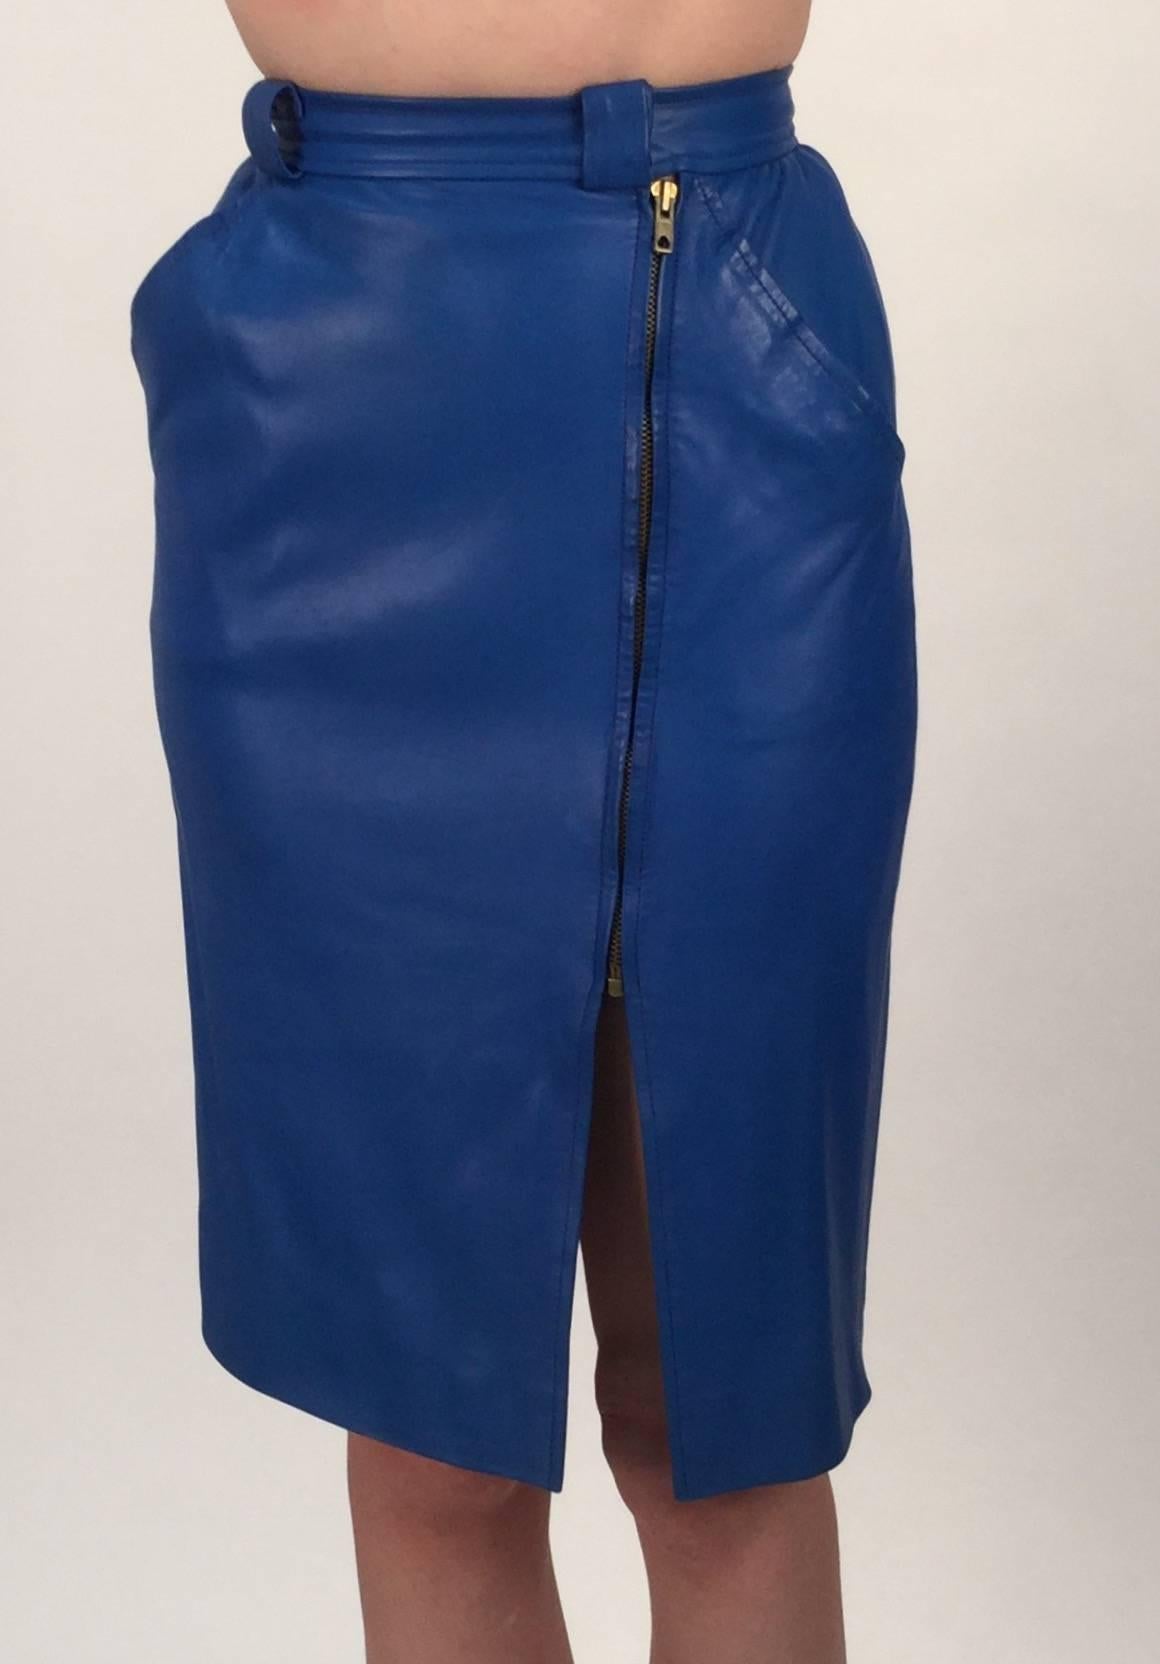 Yves Saint Laurent Blue Leather Jacket and Skirt Ensemble, 1980s  For Sale 6